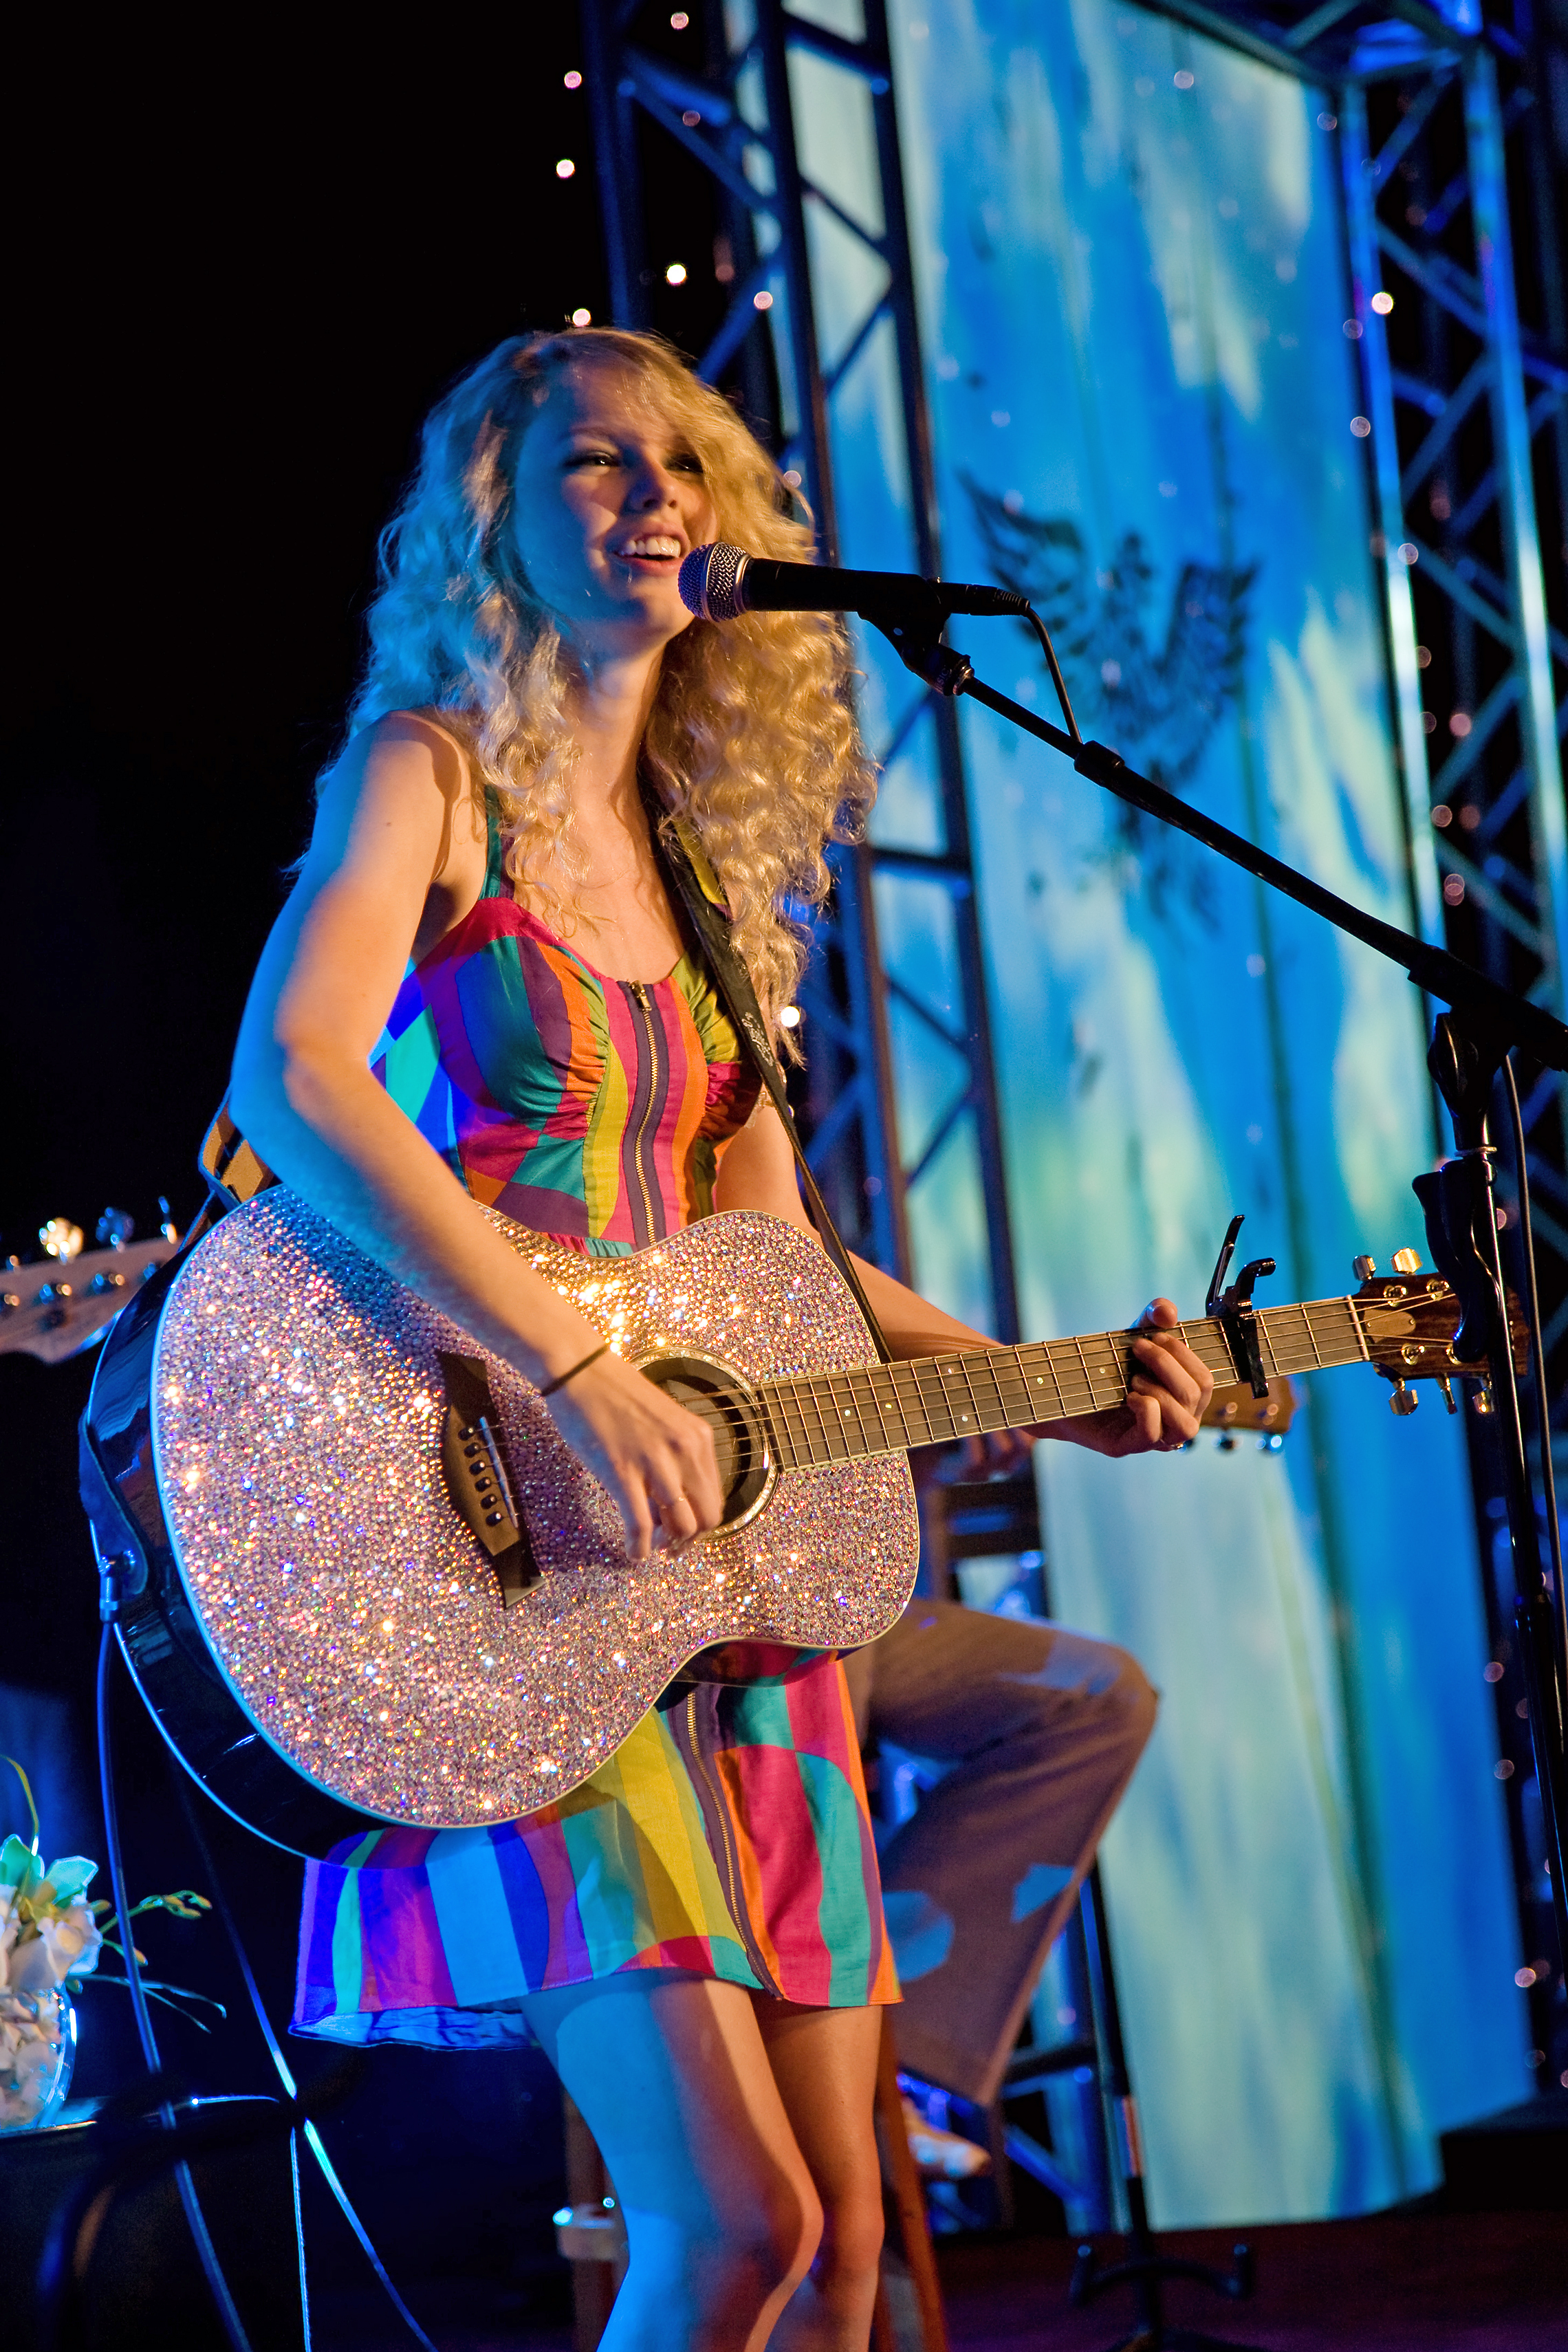 Academy student delegate Taylor Swift performs her hit songs at the 2008 Banquet of the Golden Plate in Hawaii.